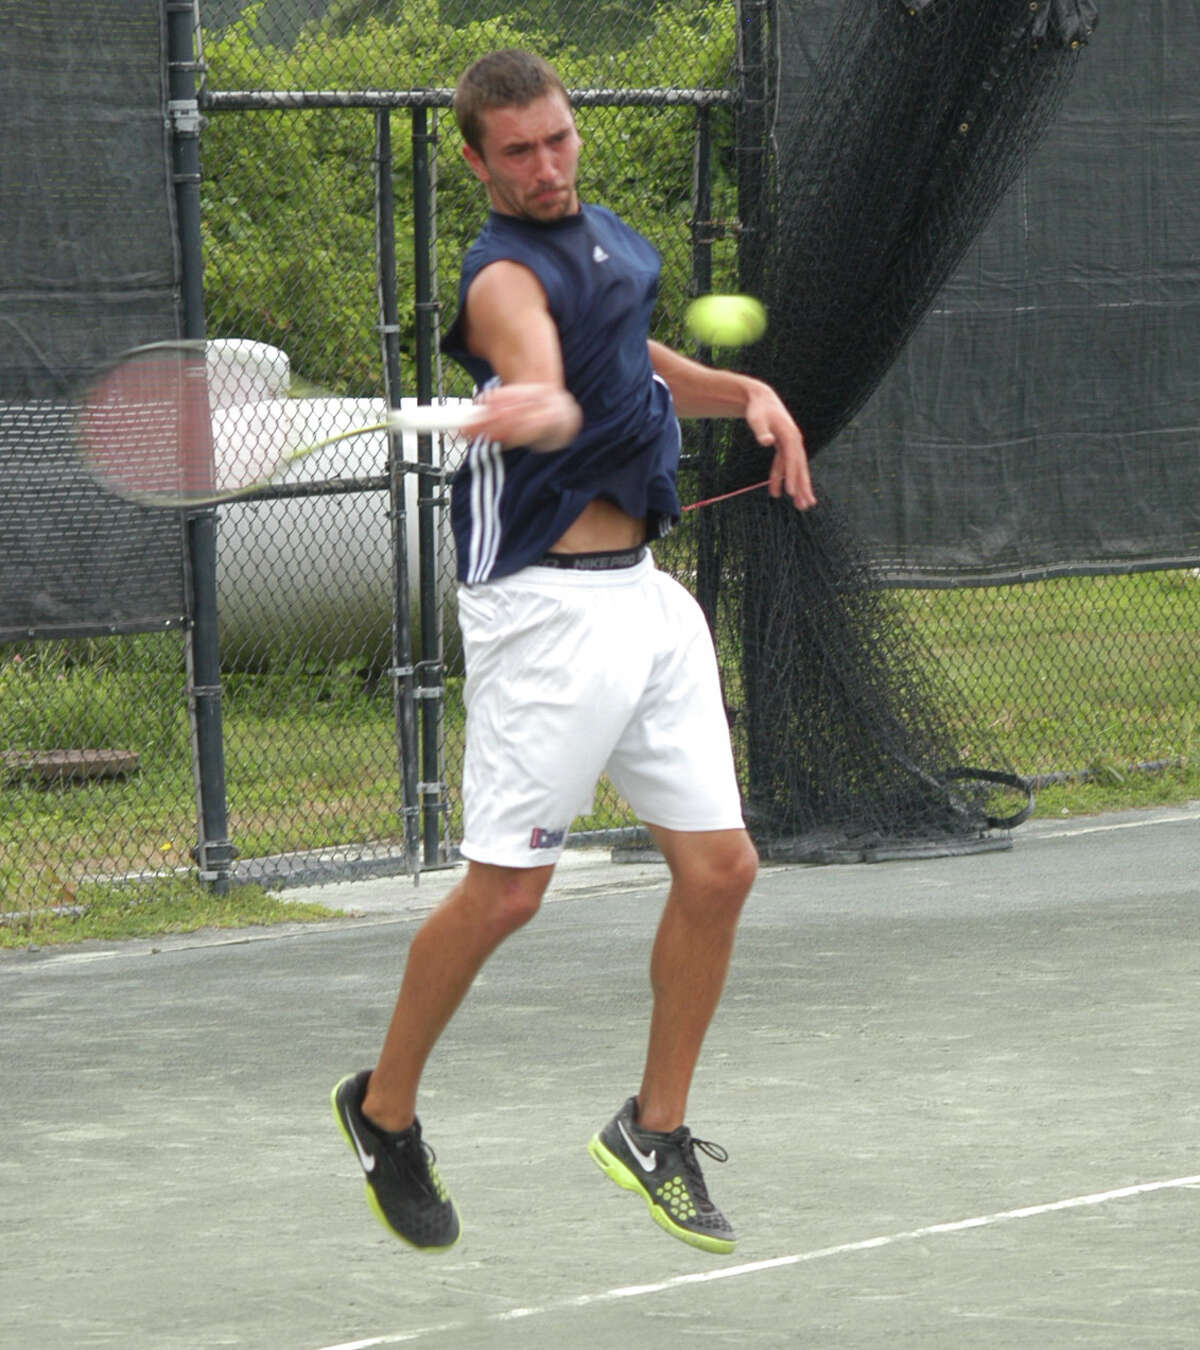 Nic Visinski sending a shot back to Joshua Heilweil on Sunday, July 27 at the men's open singles final at the annual Fairfield Town Tennis Tournament at the Fairfield Tennis Center. Visinski lost the championship to Heilweil by scores of 4-6, 6-1, 6-1.